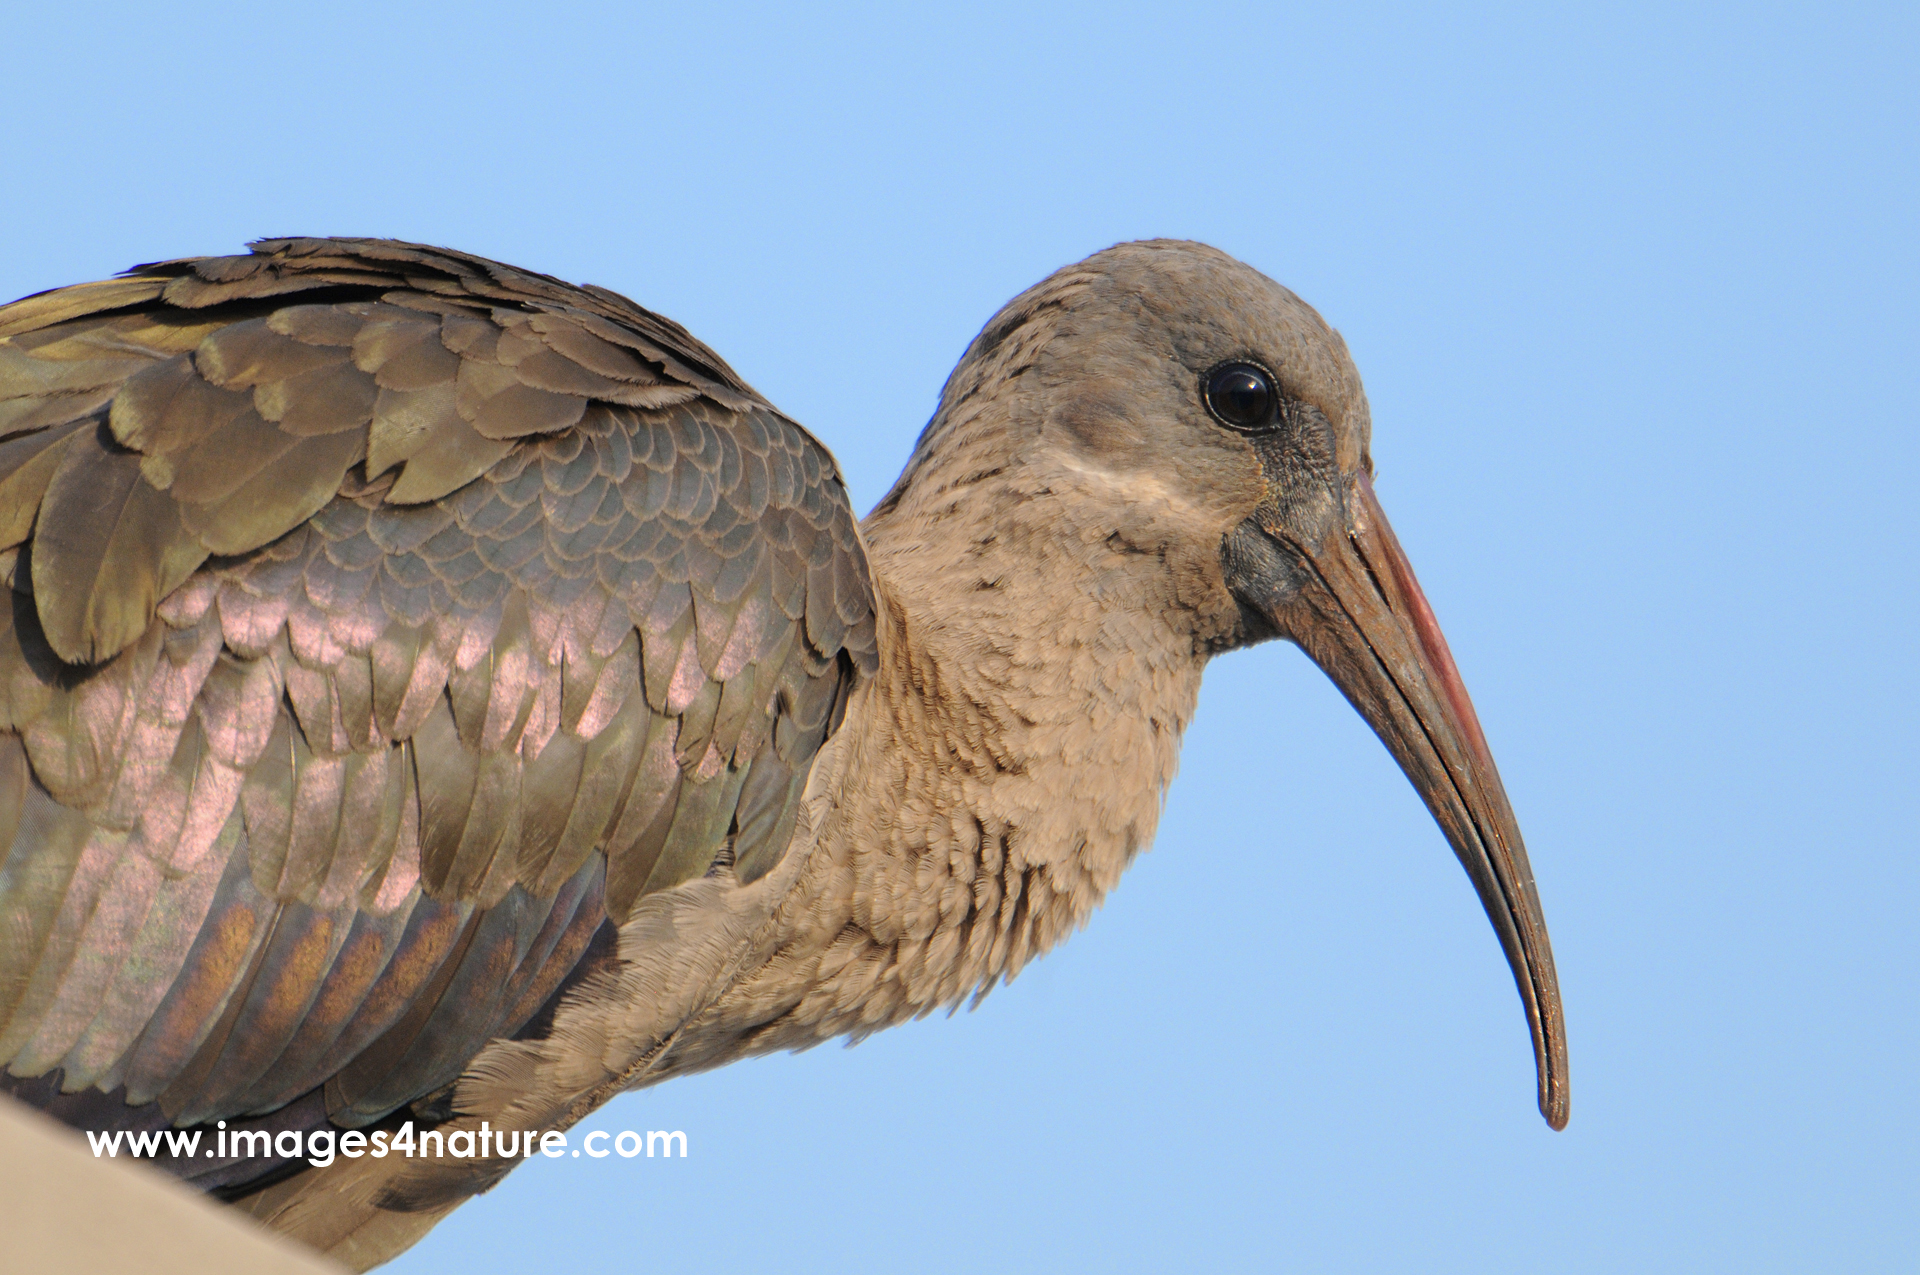 Hadeda ibis with shining feathers and long beak against blue sky